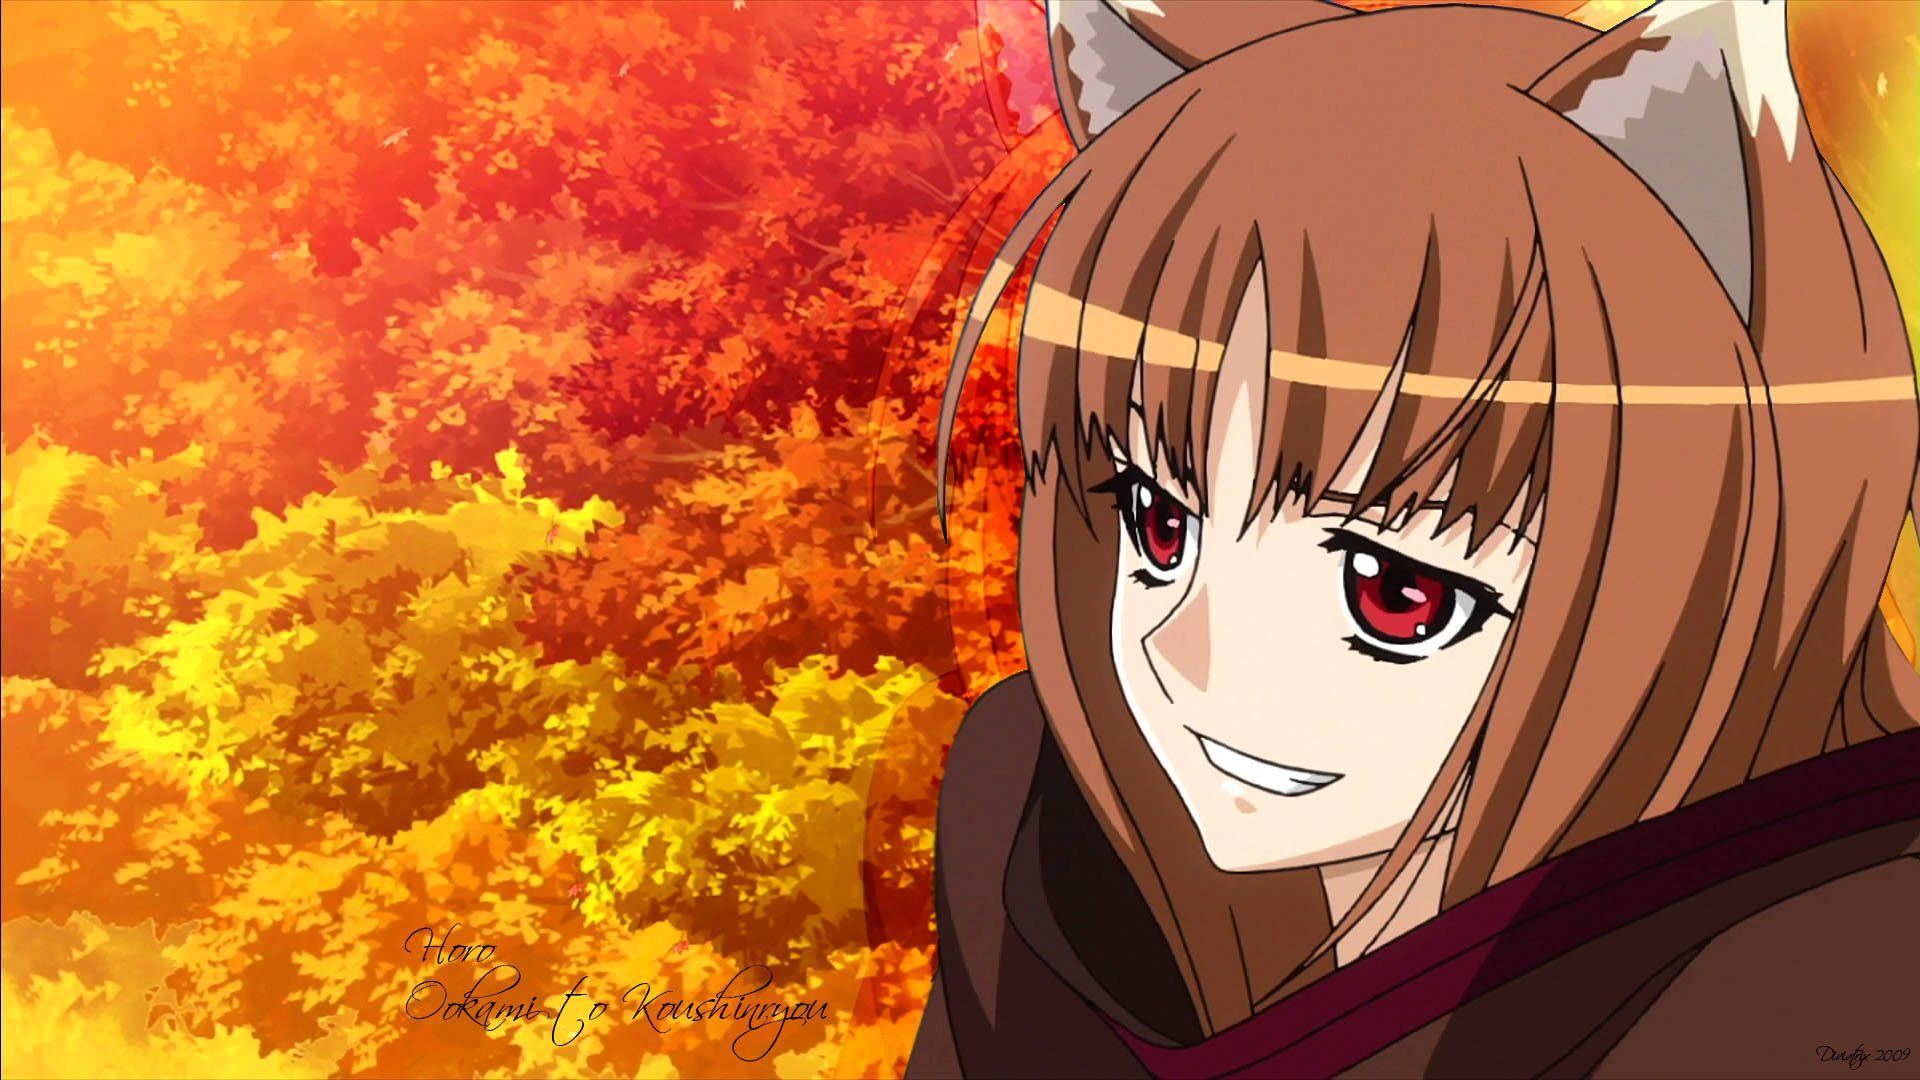 Spice and Wolf Wallpaper HD